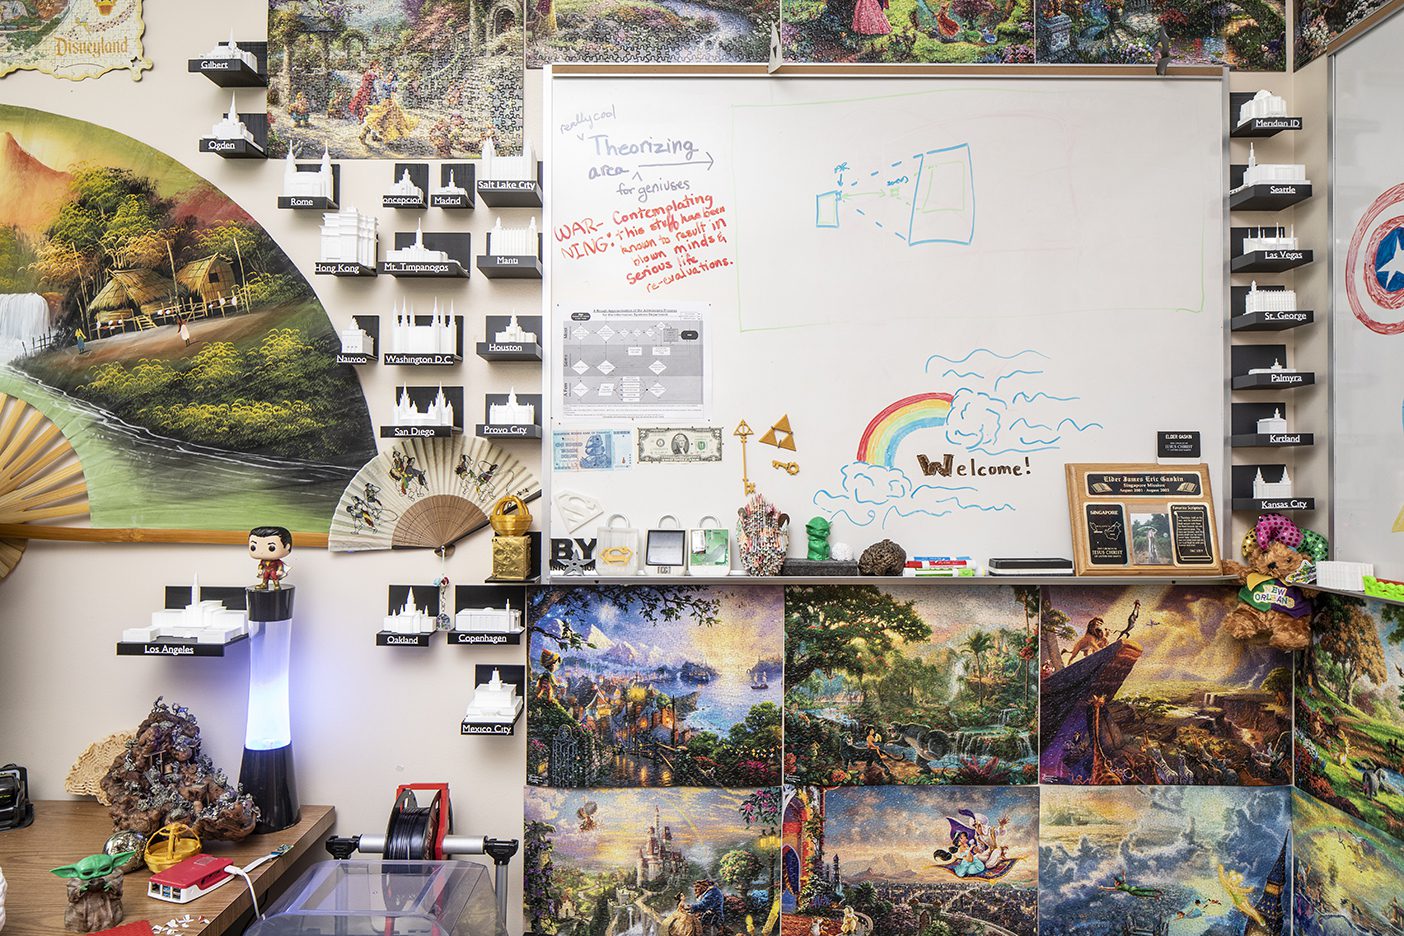 A corner of James Gaskin's office with 3D printed temples, Disney puzzles, and other knick knacks.